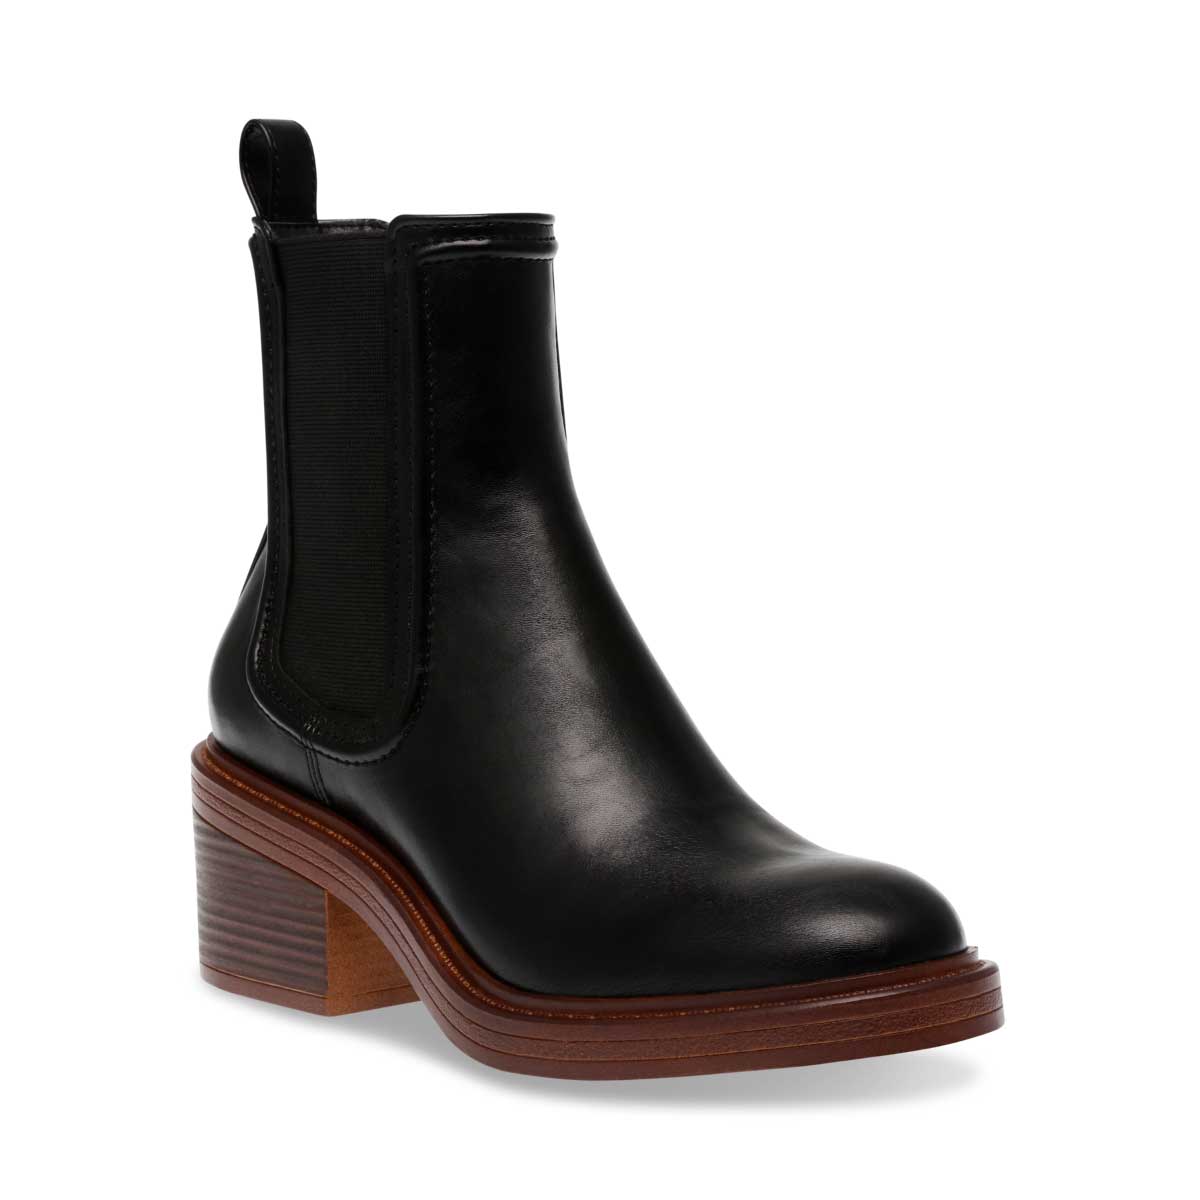 Steve Madden Curtsy Platform Chelsea Boot black leather front side  | MILK MONEY milkmoney.co | cute shoes for women. ladies shoes. nice shoes for women. ladies shoes online. ladies footwear. womens shoes and boots. pretty shoes for women. beautiful shoes for women.